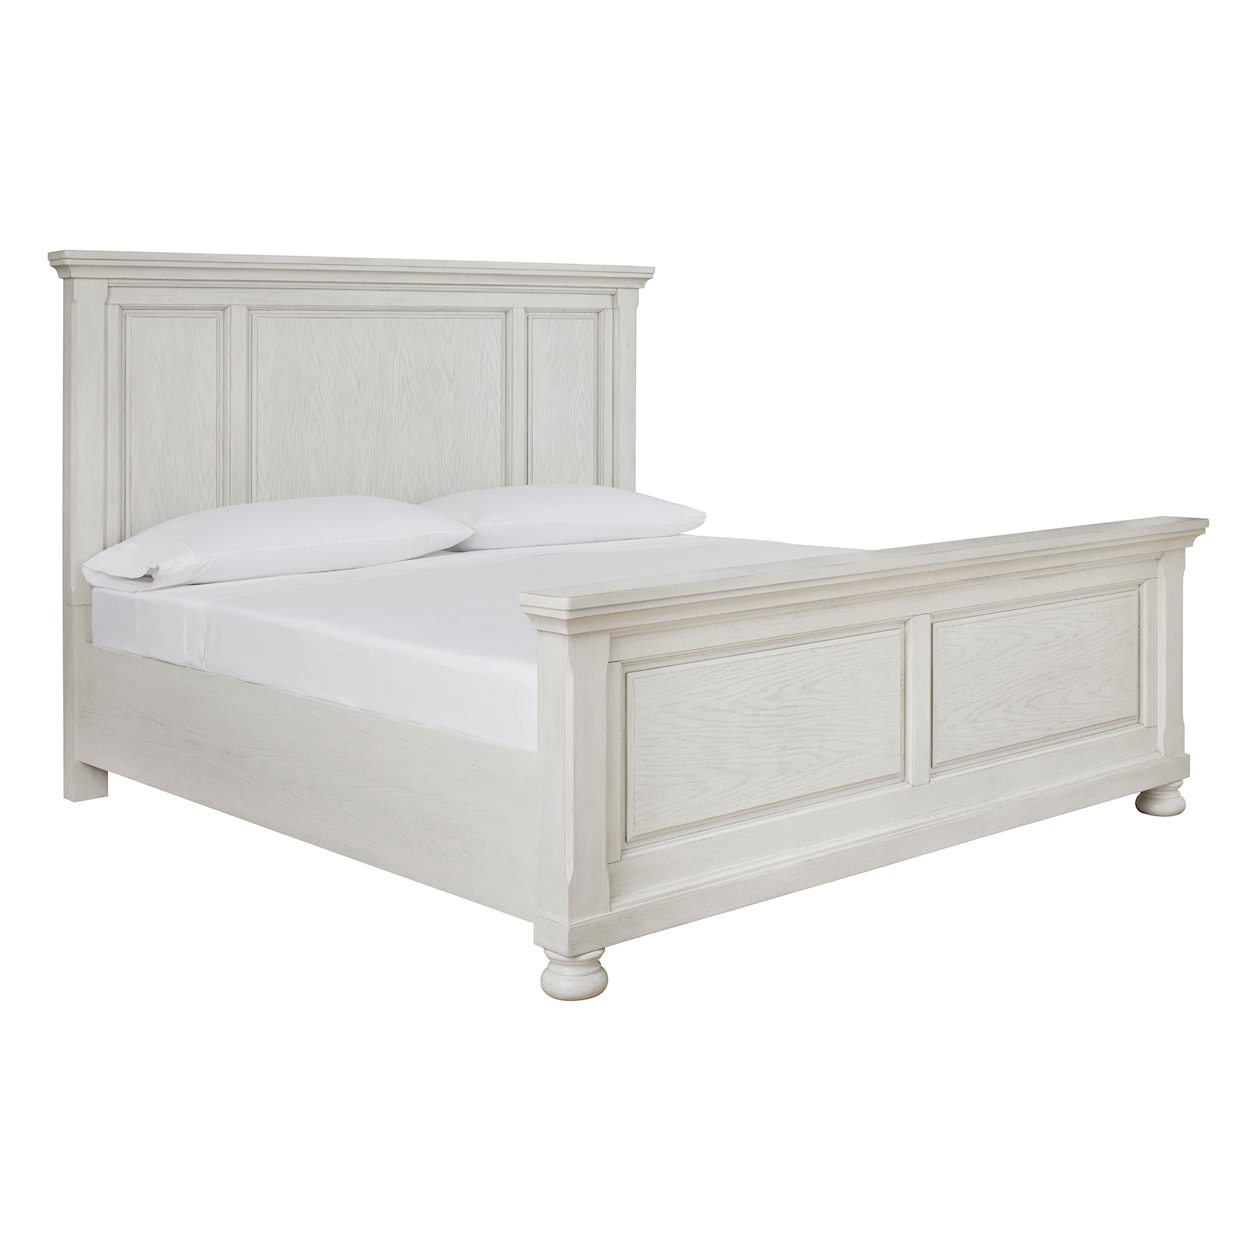 Ashley Signature Design Robbinsdale Queen Panel Bed